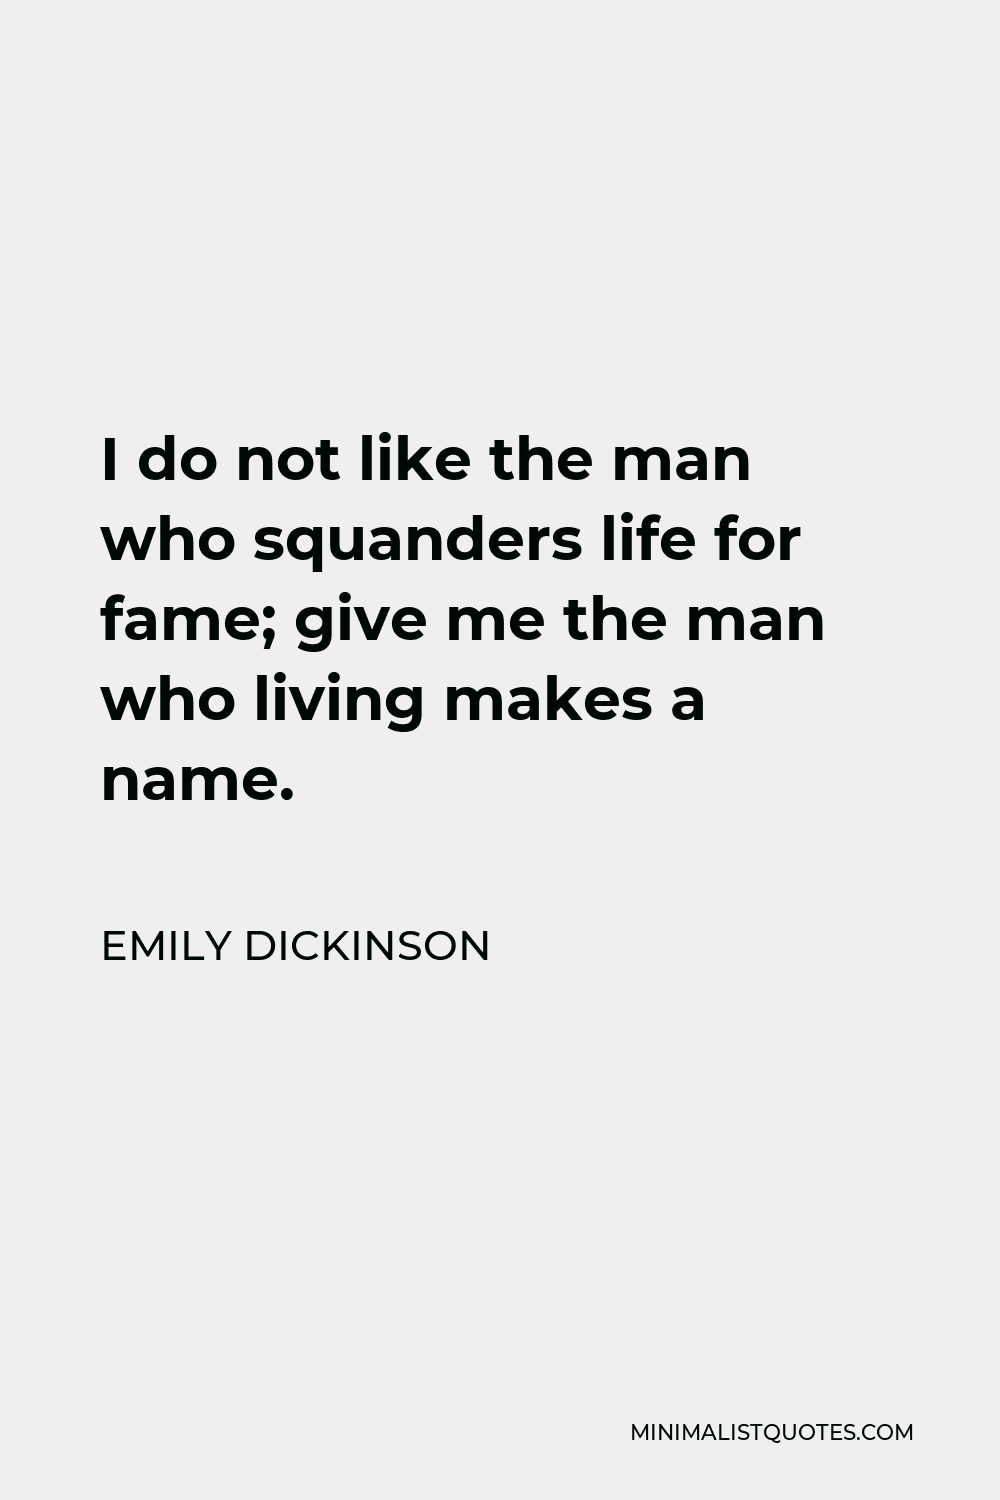 Emily Dickinson Quote - I do not like the man who squanders life for fame; give me the man who living makes a name.